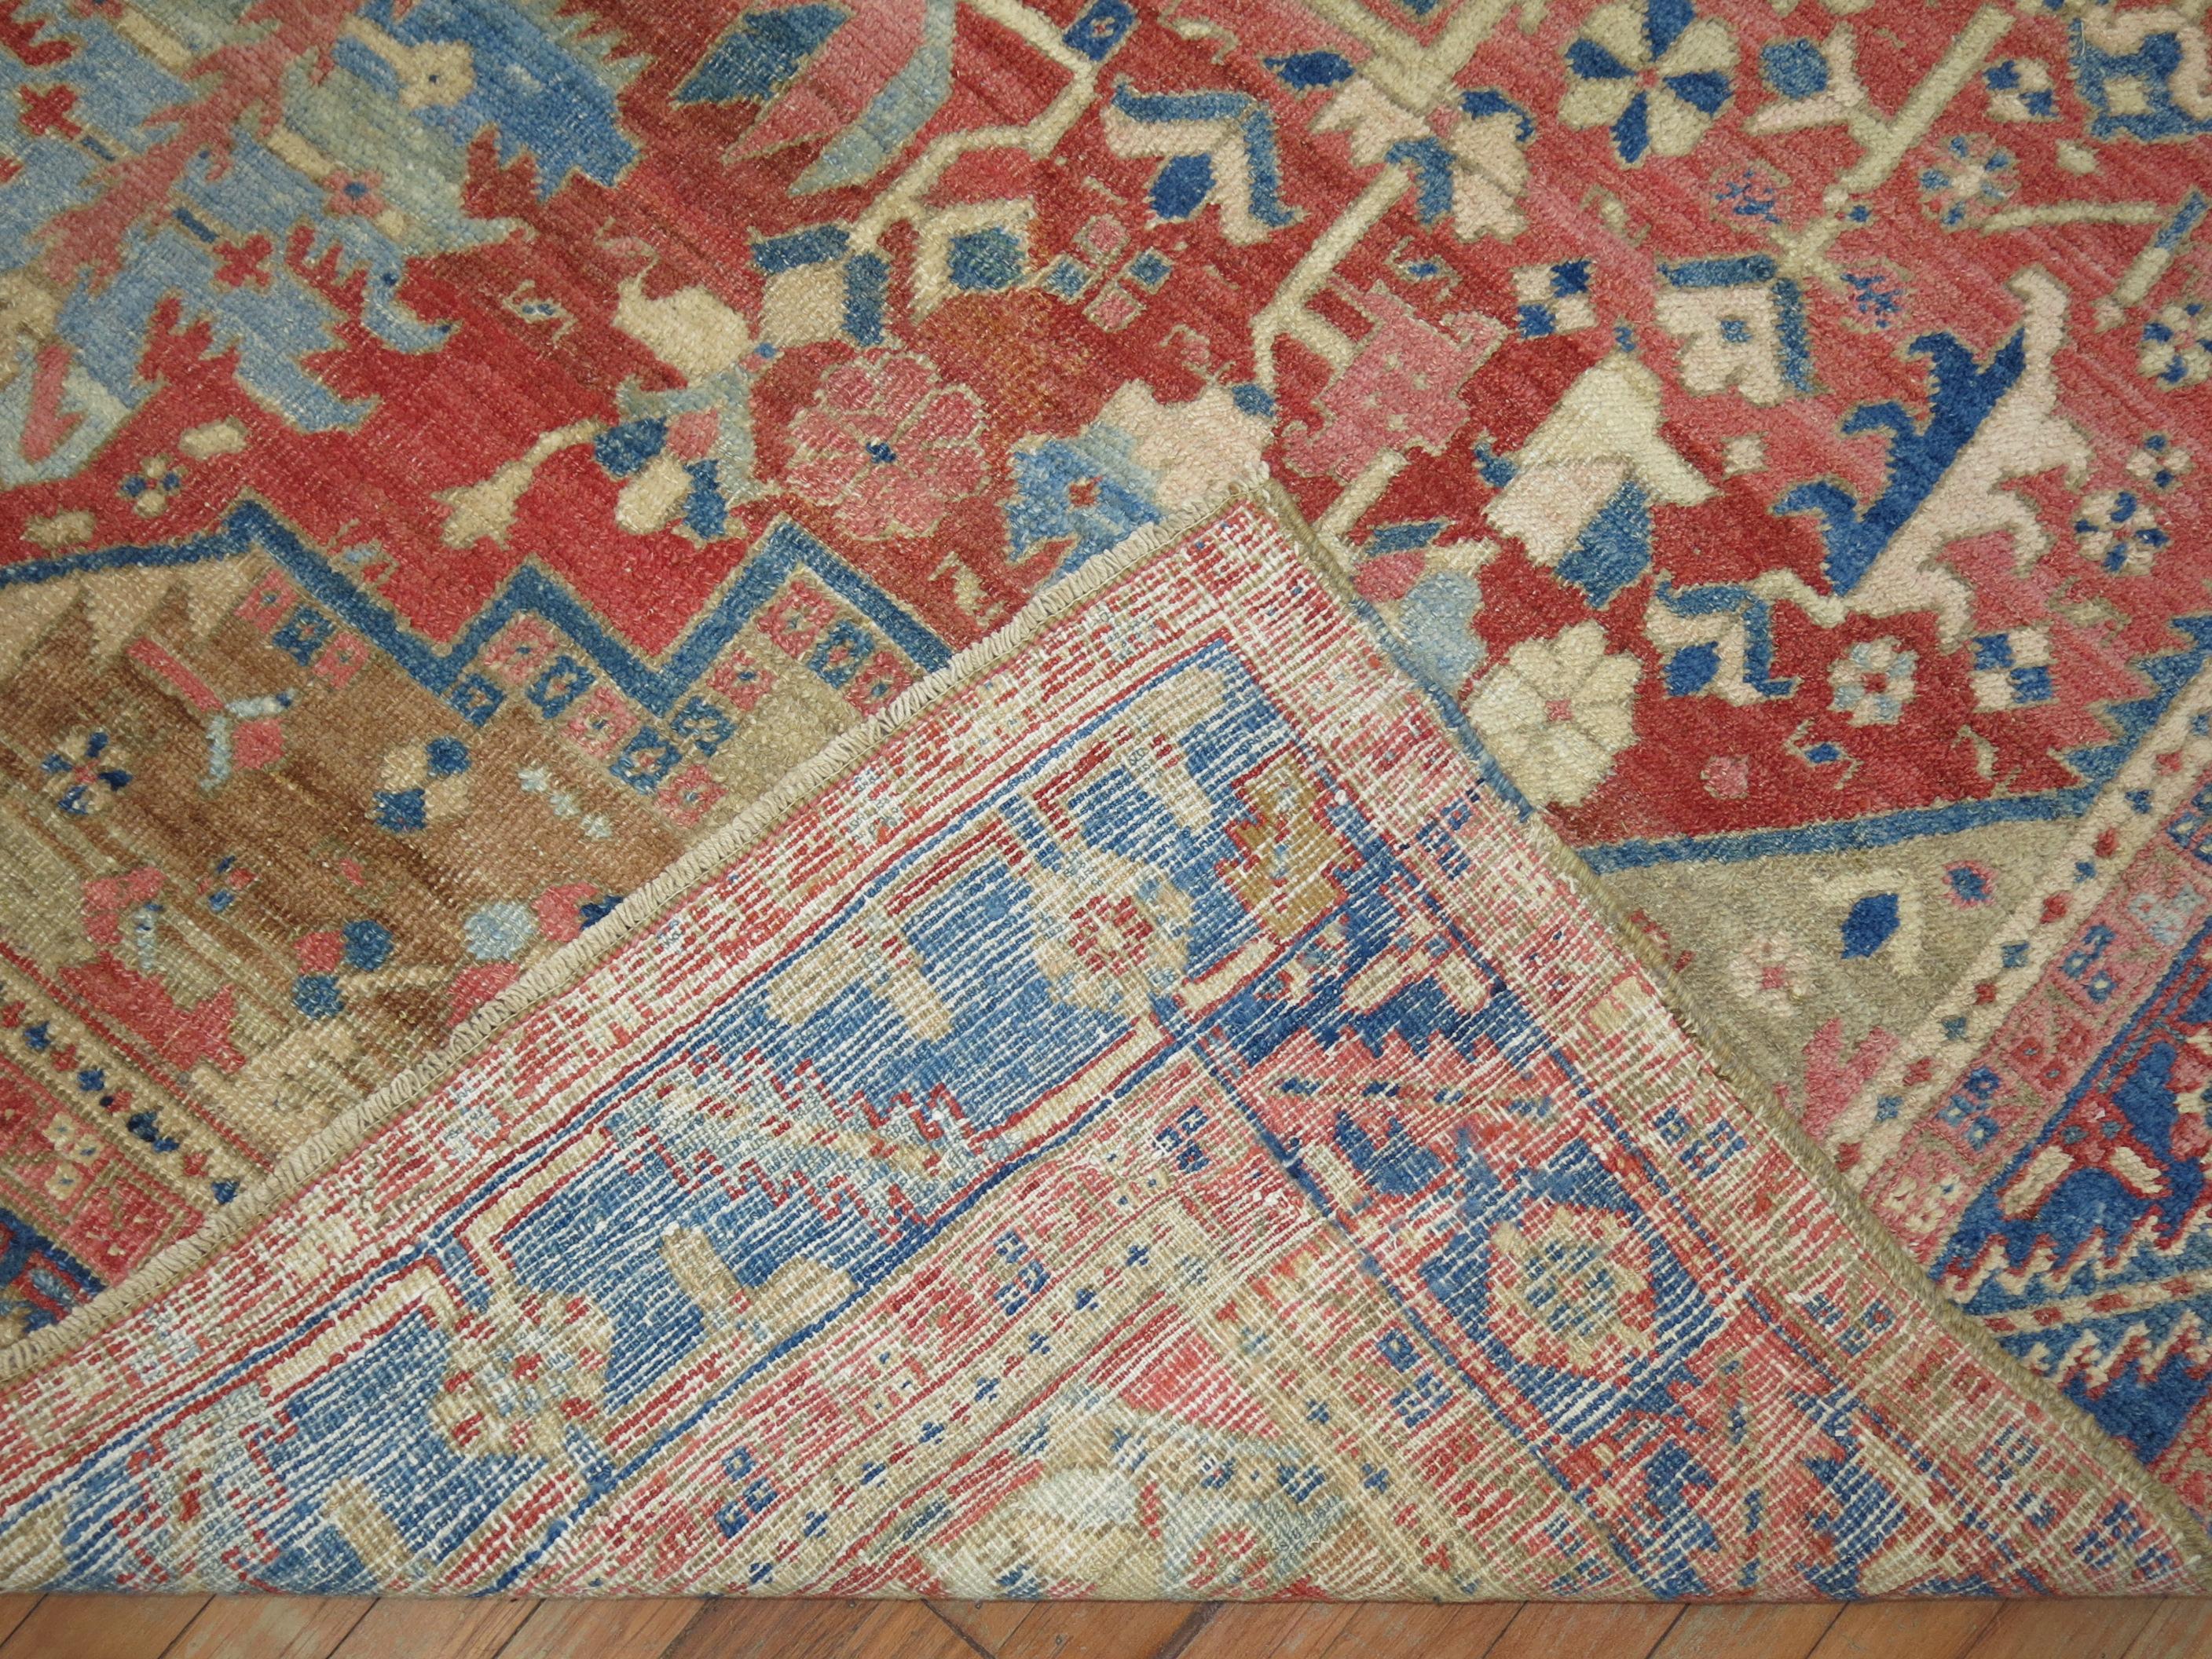 An early 20th century traditional colorful Persian Heriz carpet.

Heriz carpets are beloved for their versatility. Their geometry complements modern furnishings and their warm colors and artistic depth enhances antiques of all kinds. Their